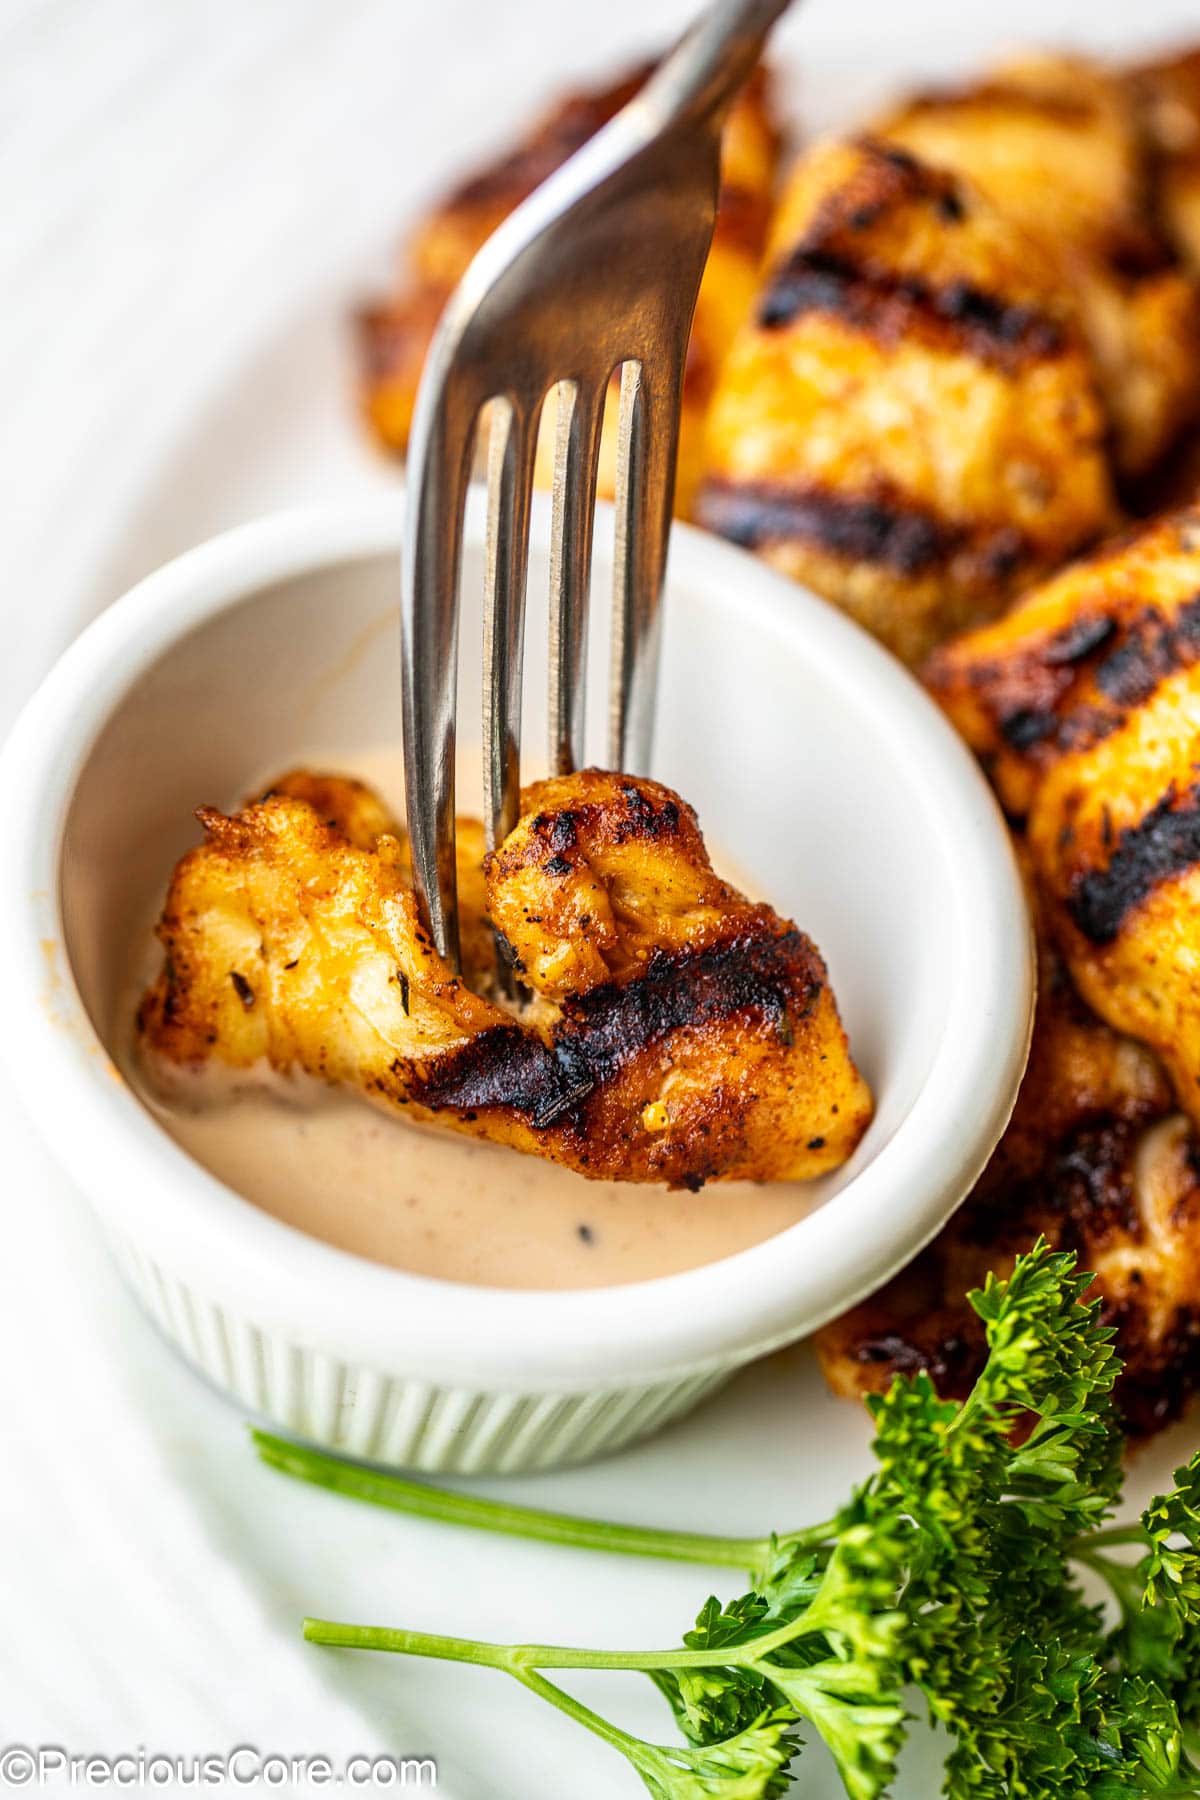 Dipping grilled chicken nuggets in sauce.